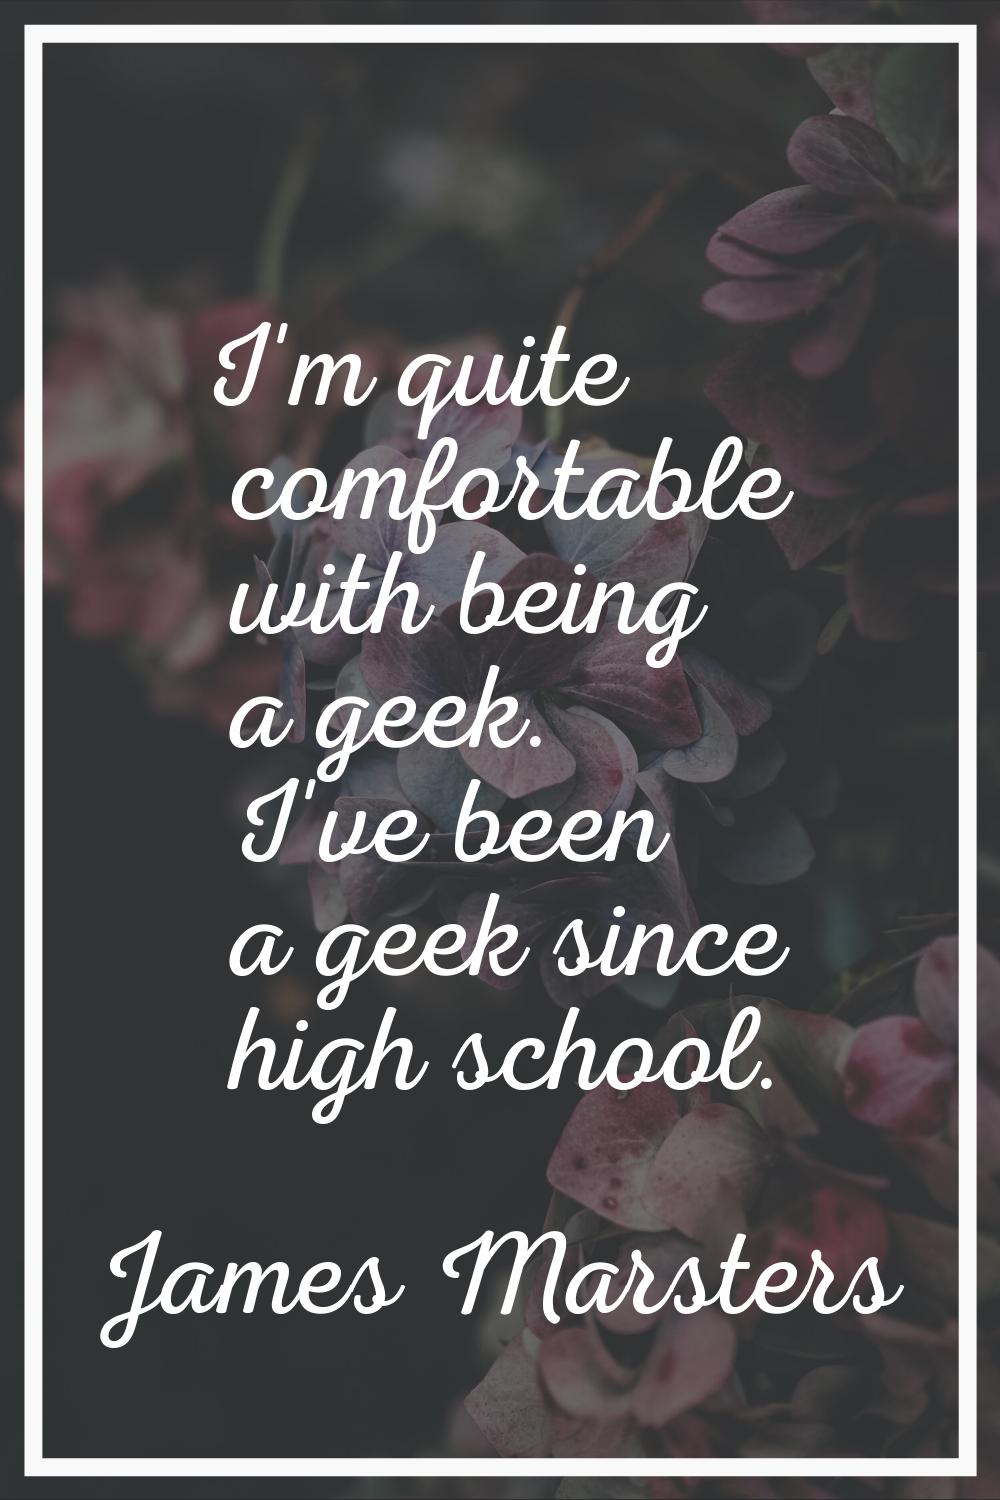 I'm quite comfortable with being a geek. I've been a geek since high school.